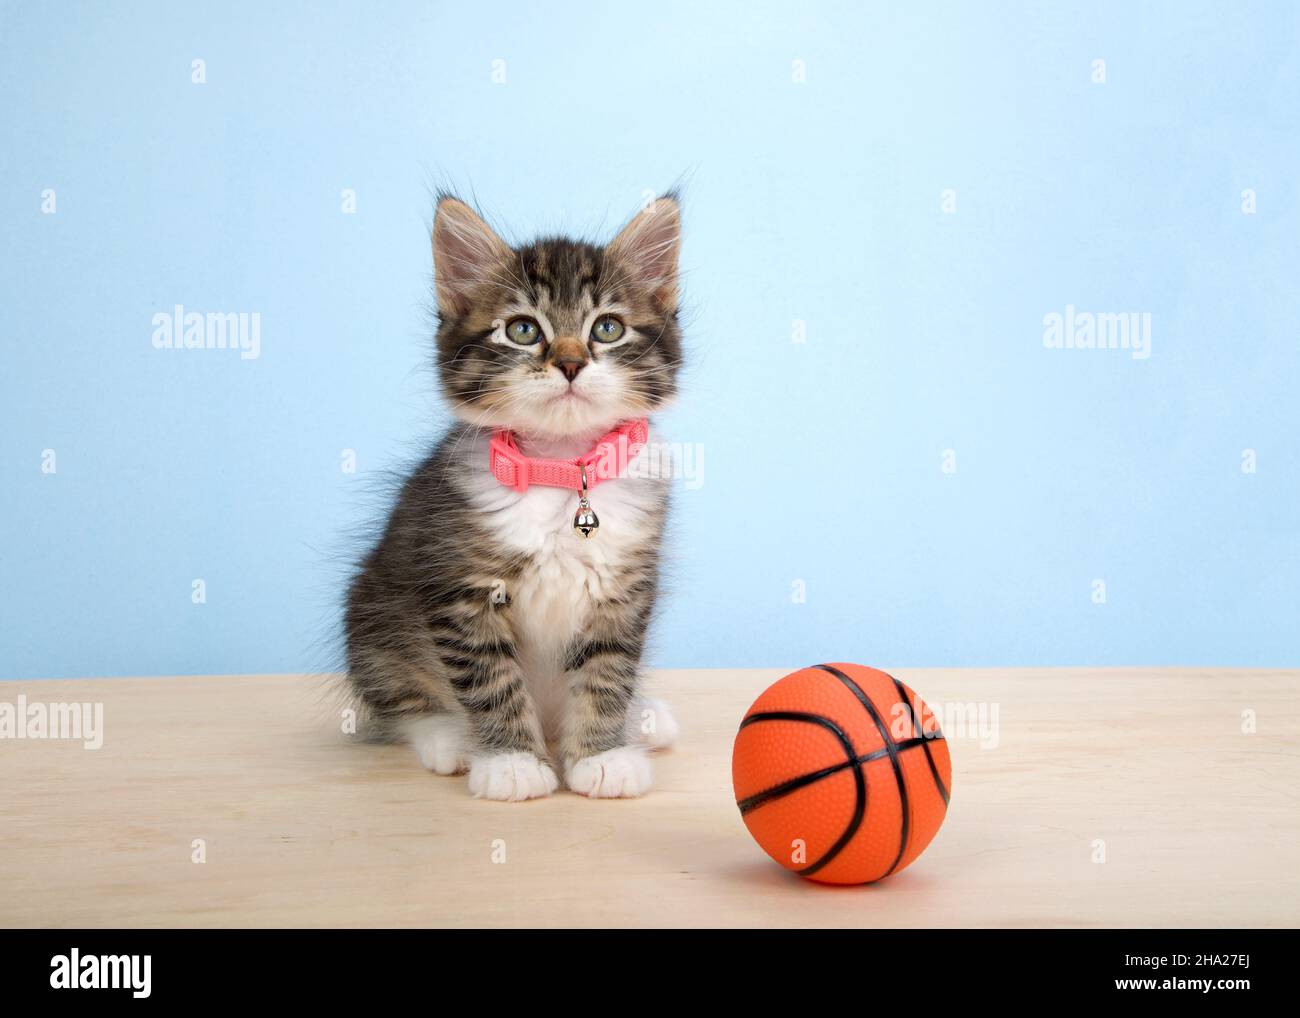 Adorable grey and white polydactyl kitten wearing a pink collar sitting on a wood floor next to tiny sized basketball, on blue background. Animal anti Stock Photo